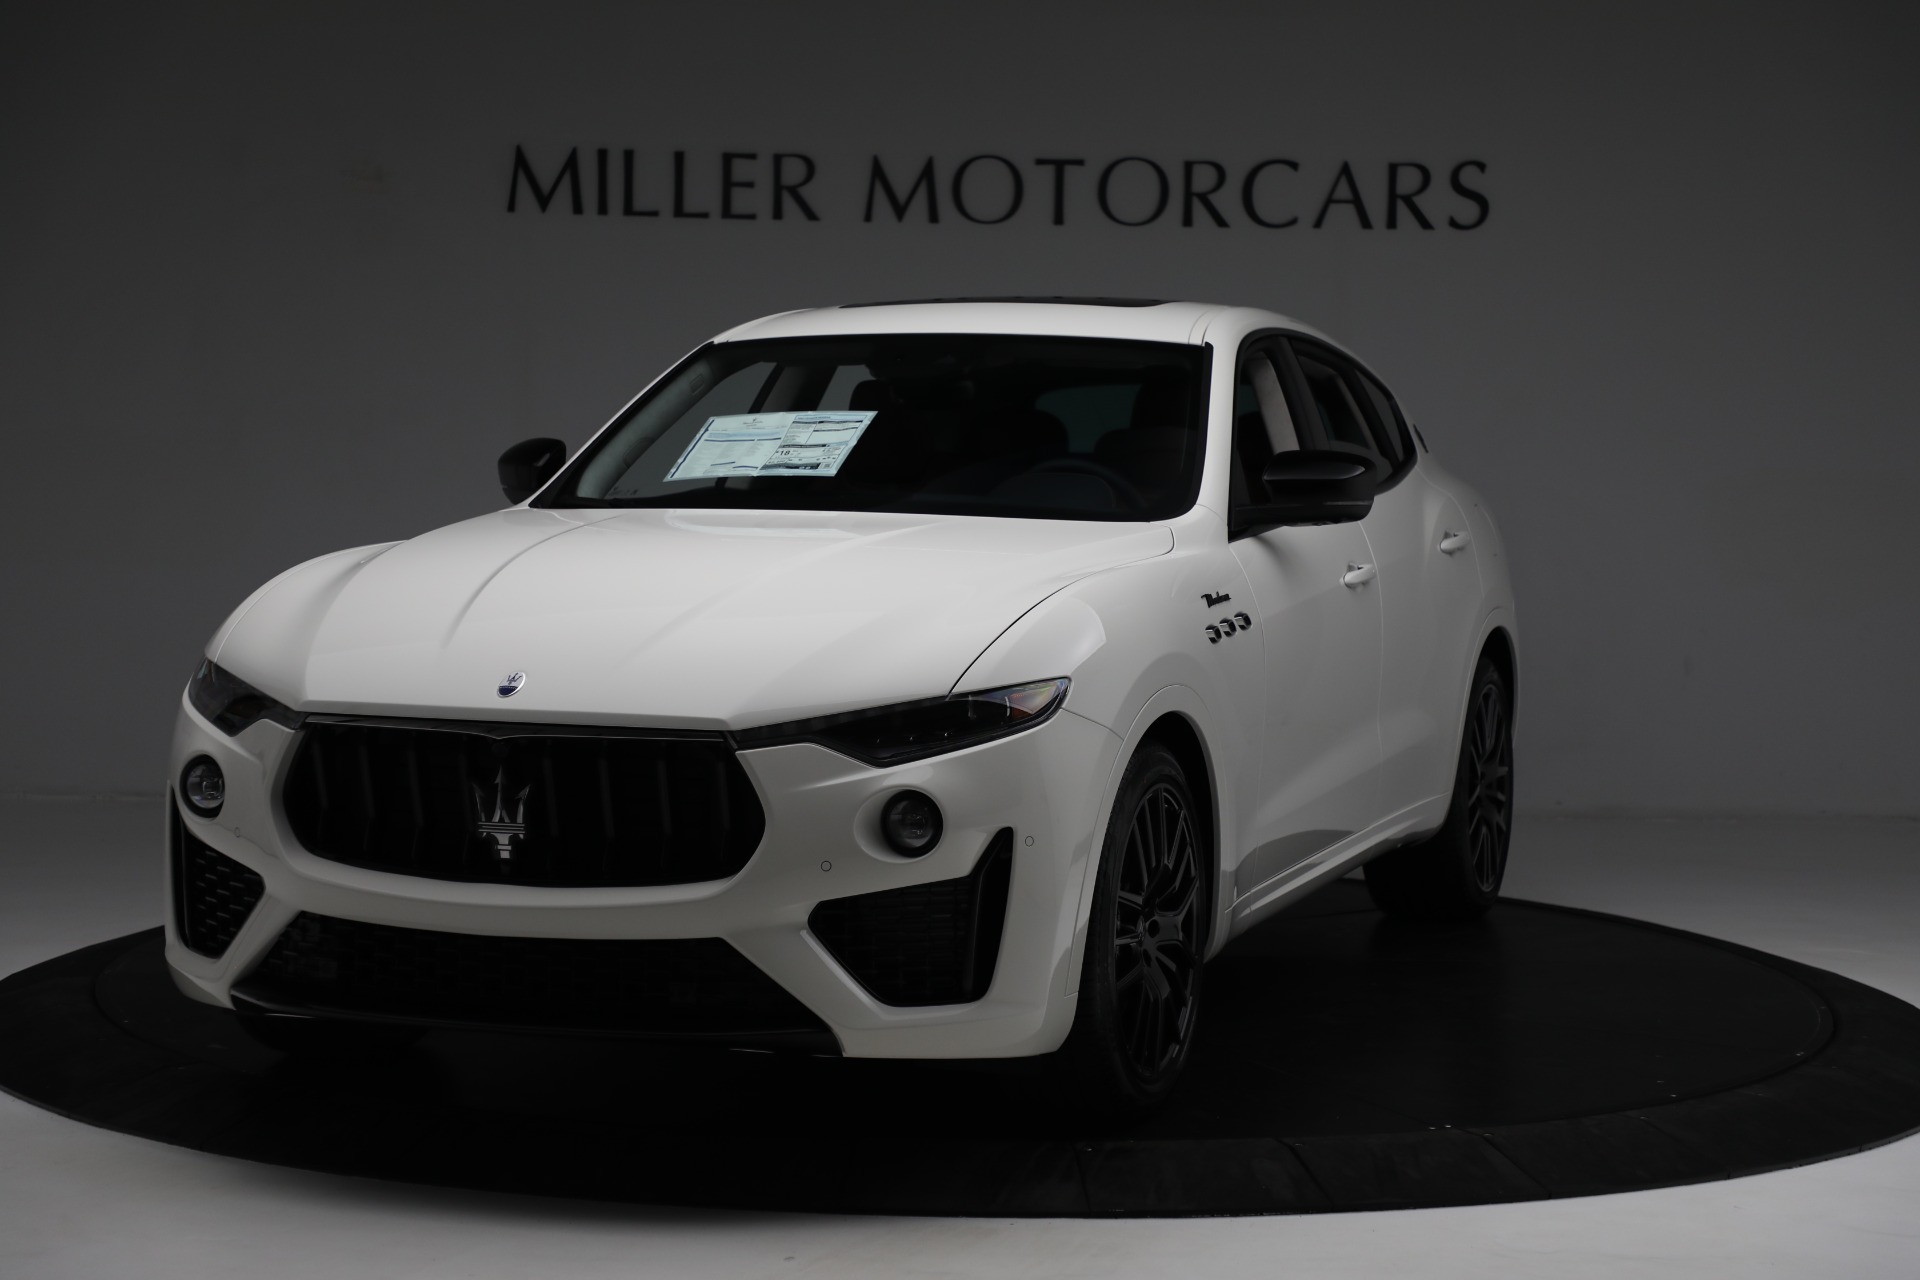 New 2022 Maserati Levante Modena for sale $111,885 at Rolls-Royce Motor Cars Greenwich in Greenwich CT 06830 1